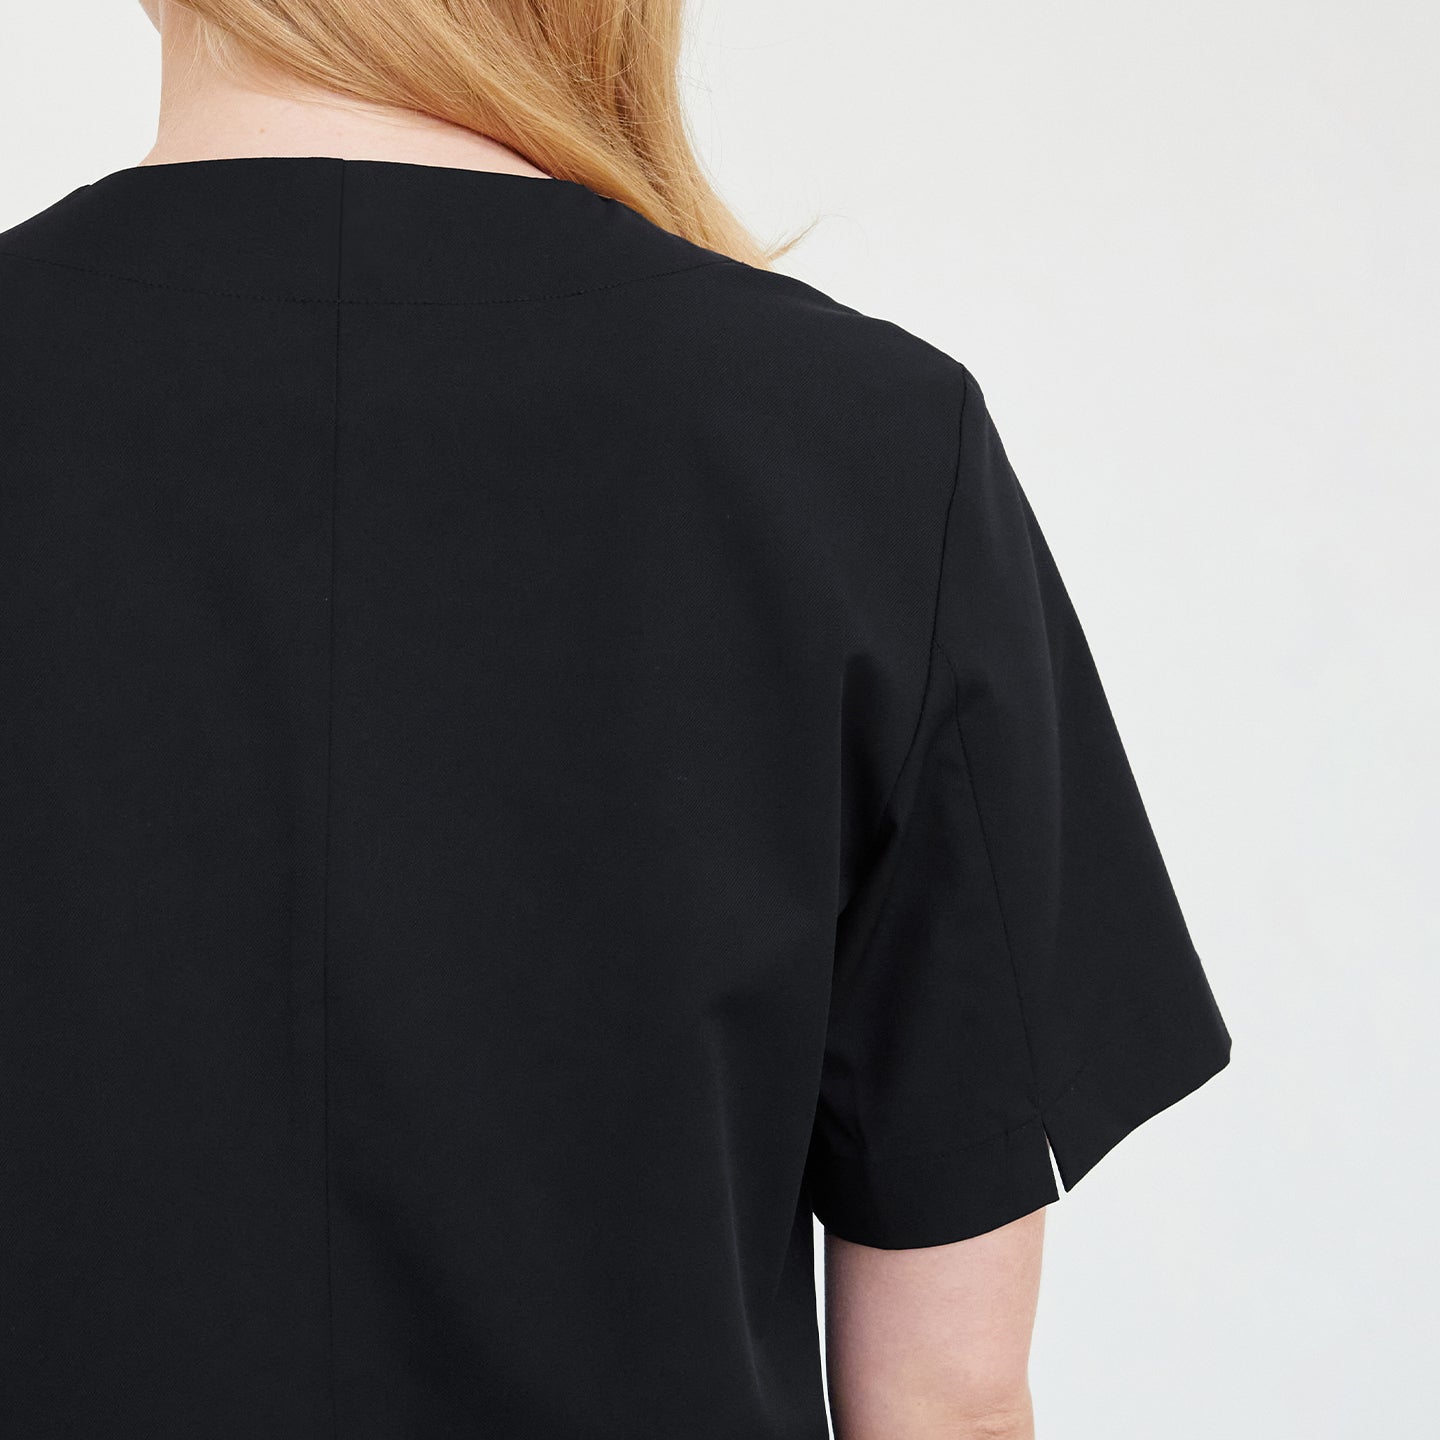 Back detail of a woman wearing a black scrub top, showing the stitching and fabric texture,Black